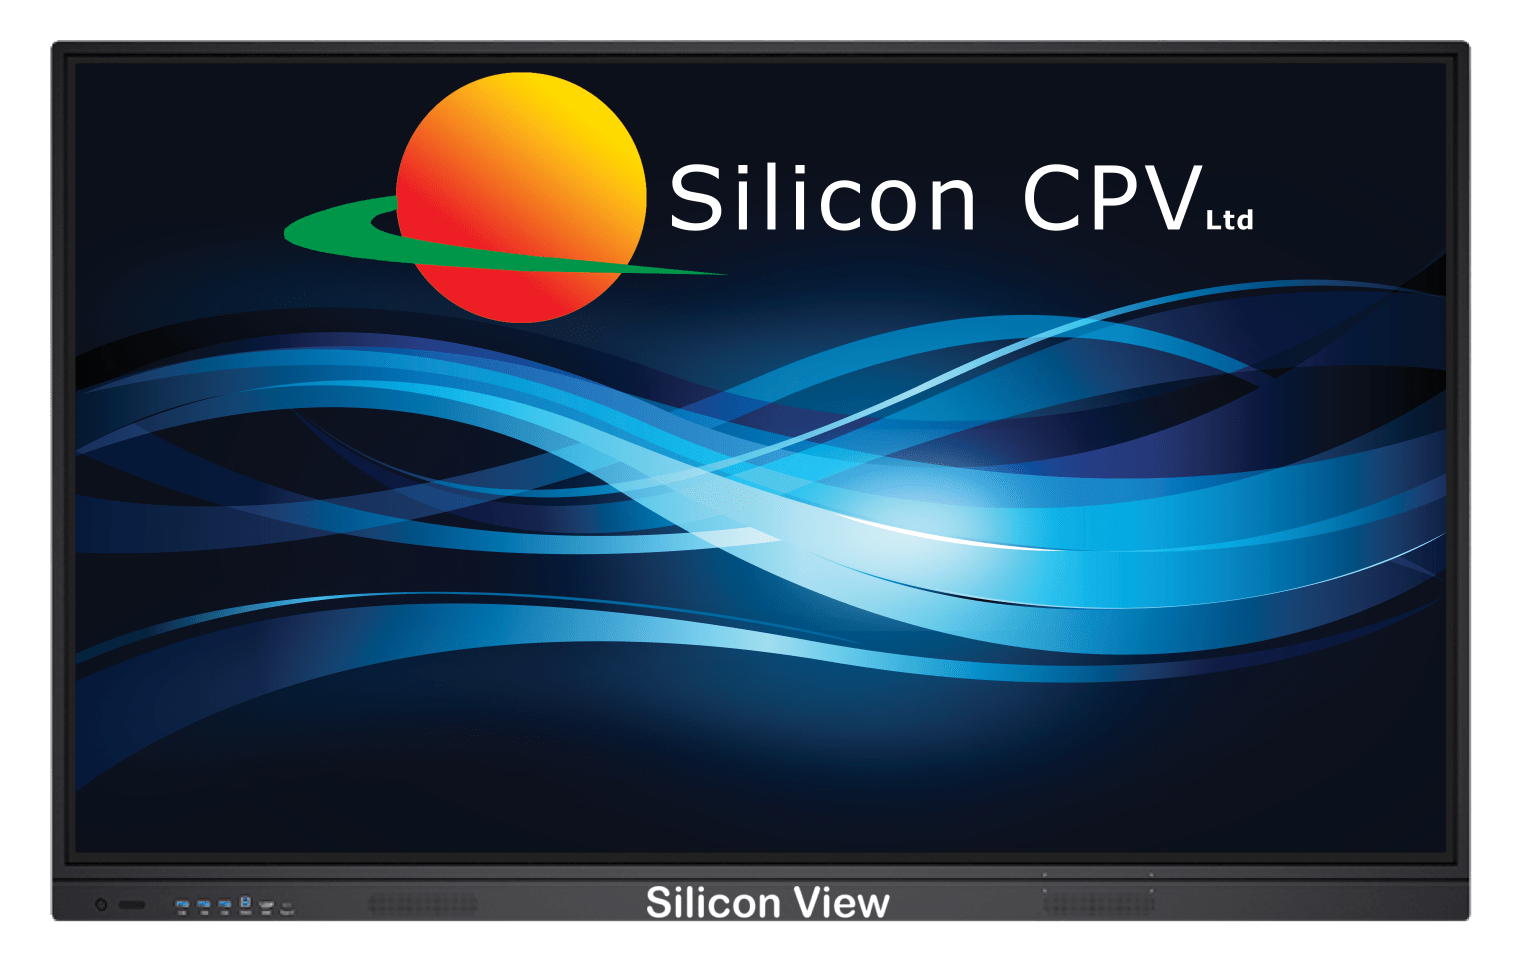 Silicon view Interactive Touch Screen image